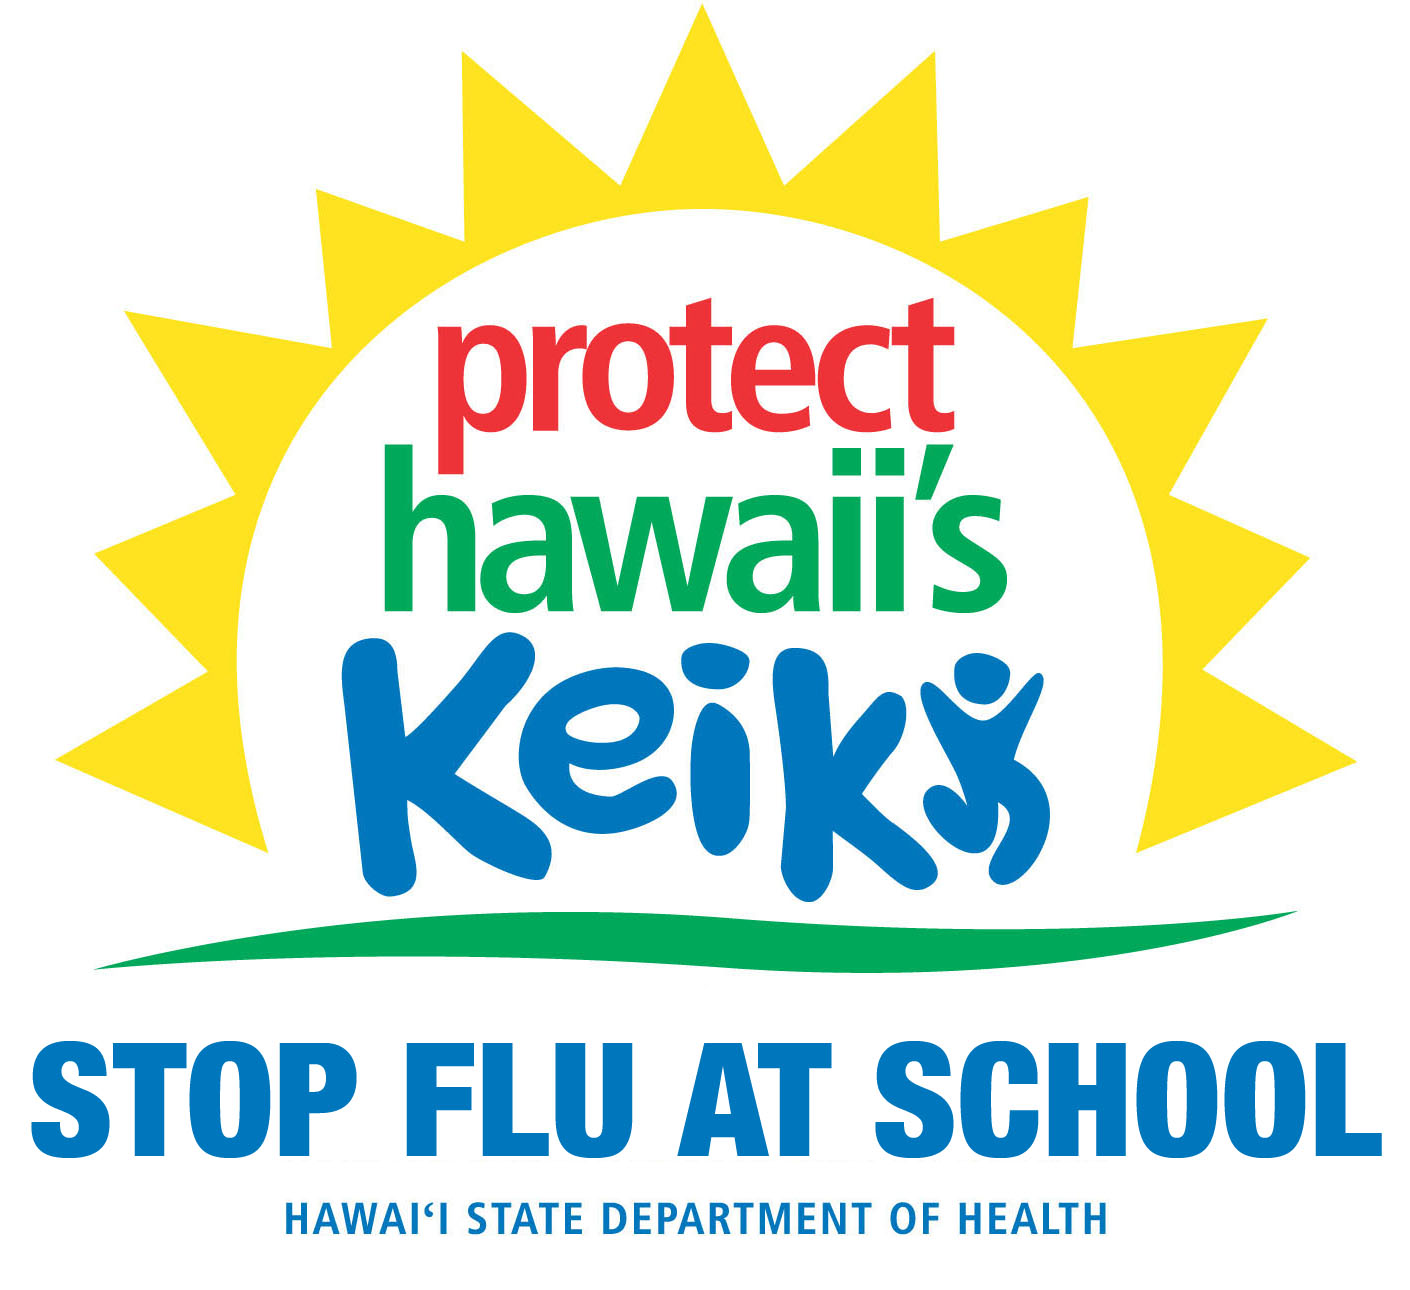 Annual Stop Flu at School Vaccination Program Limited to Selected Public Schools Statewide